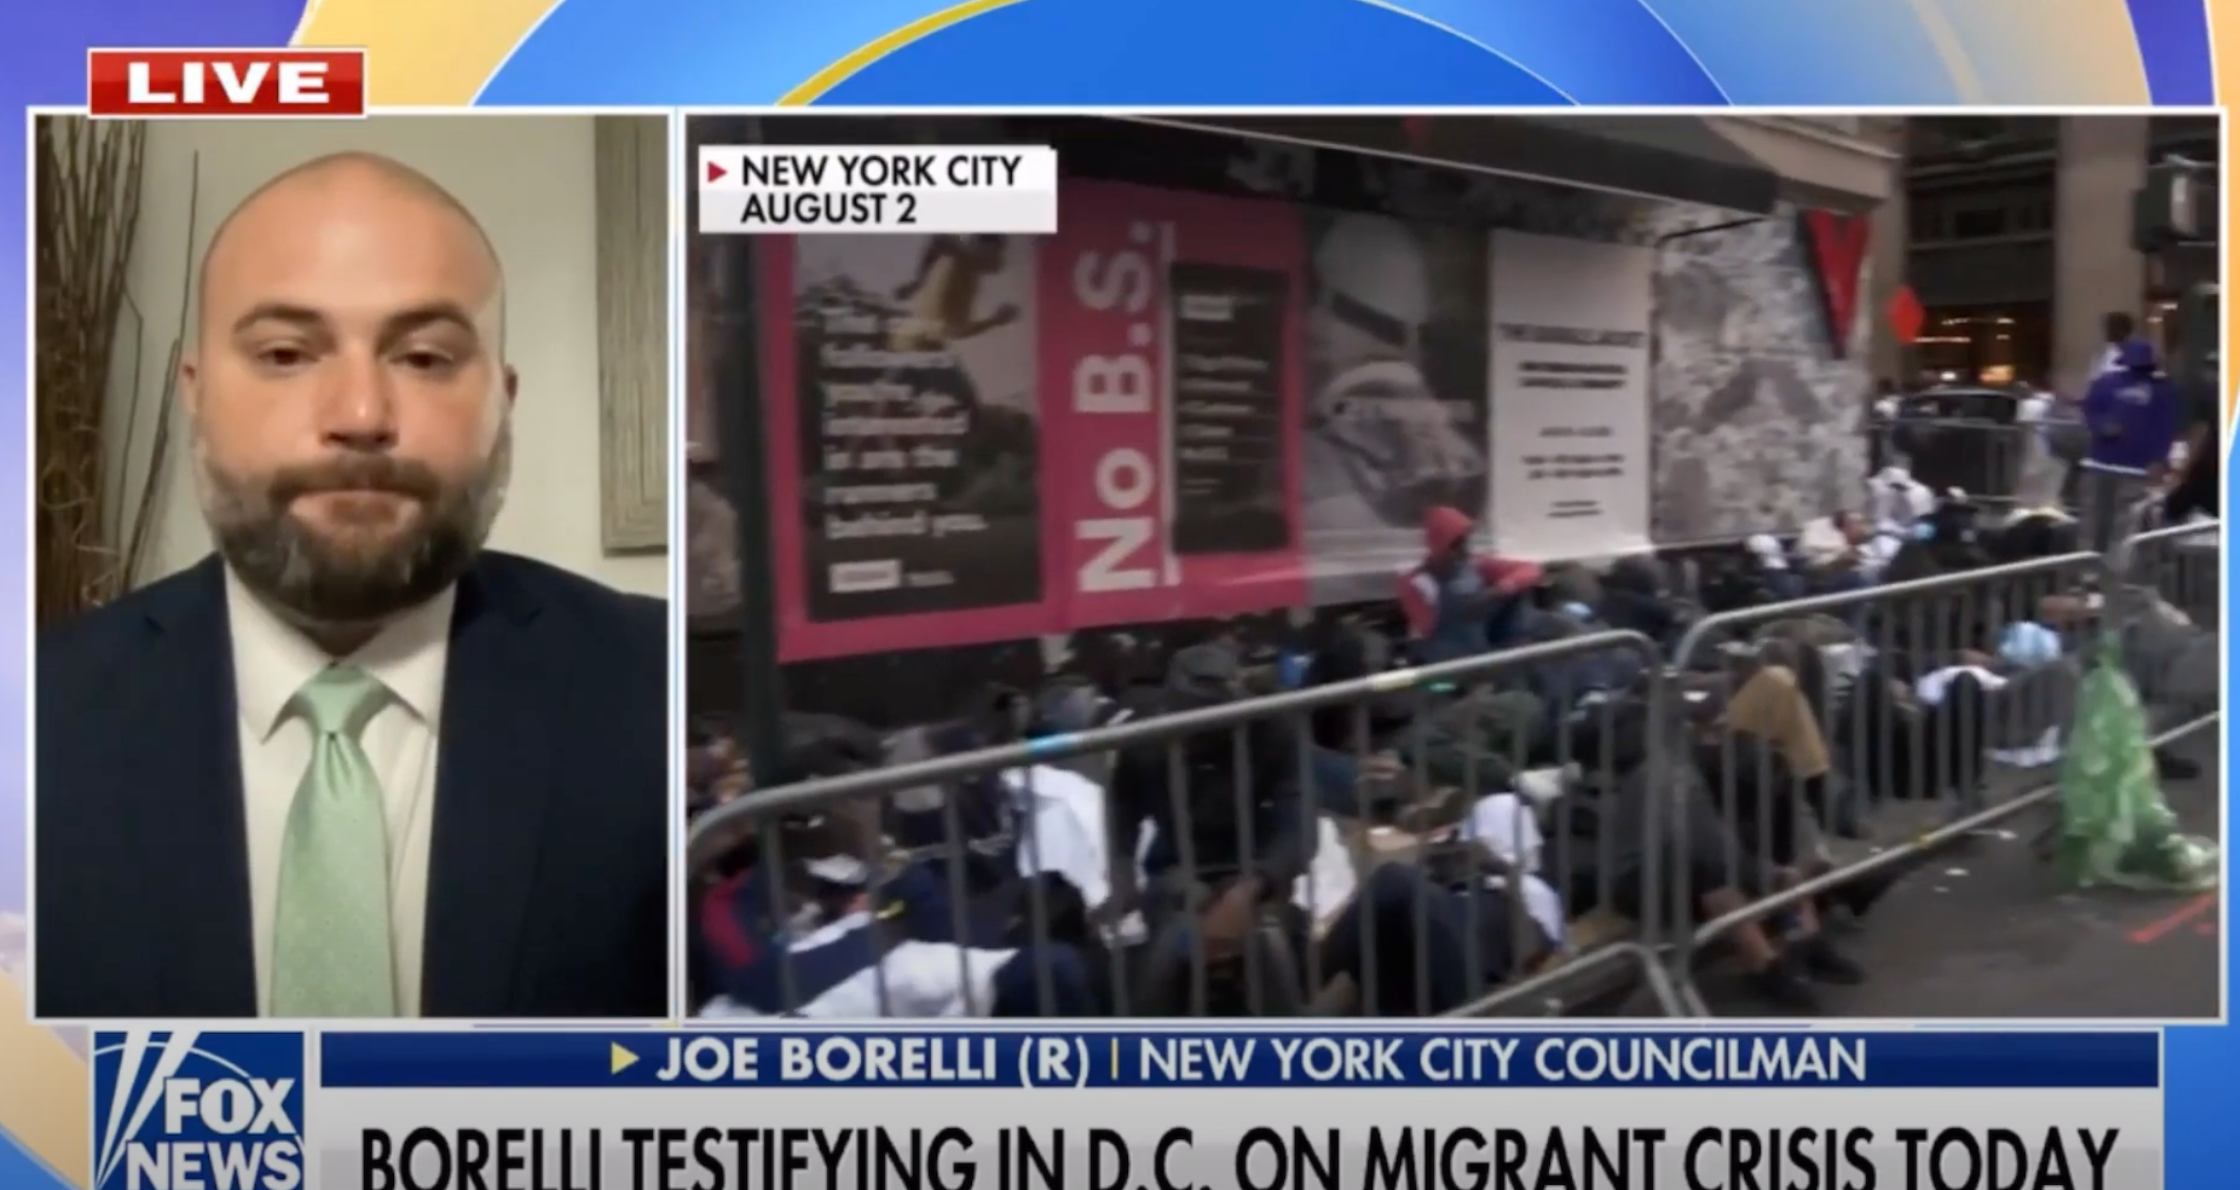 Borelli joins Fox News to discuss his upcoming testimony on Migrant Crisis in NYC